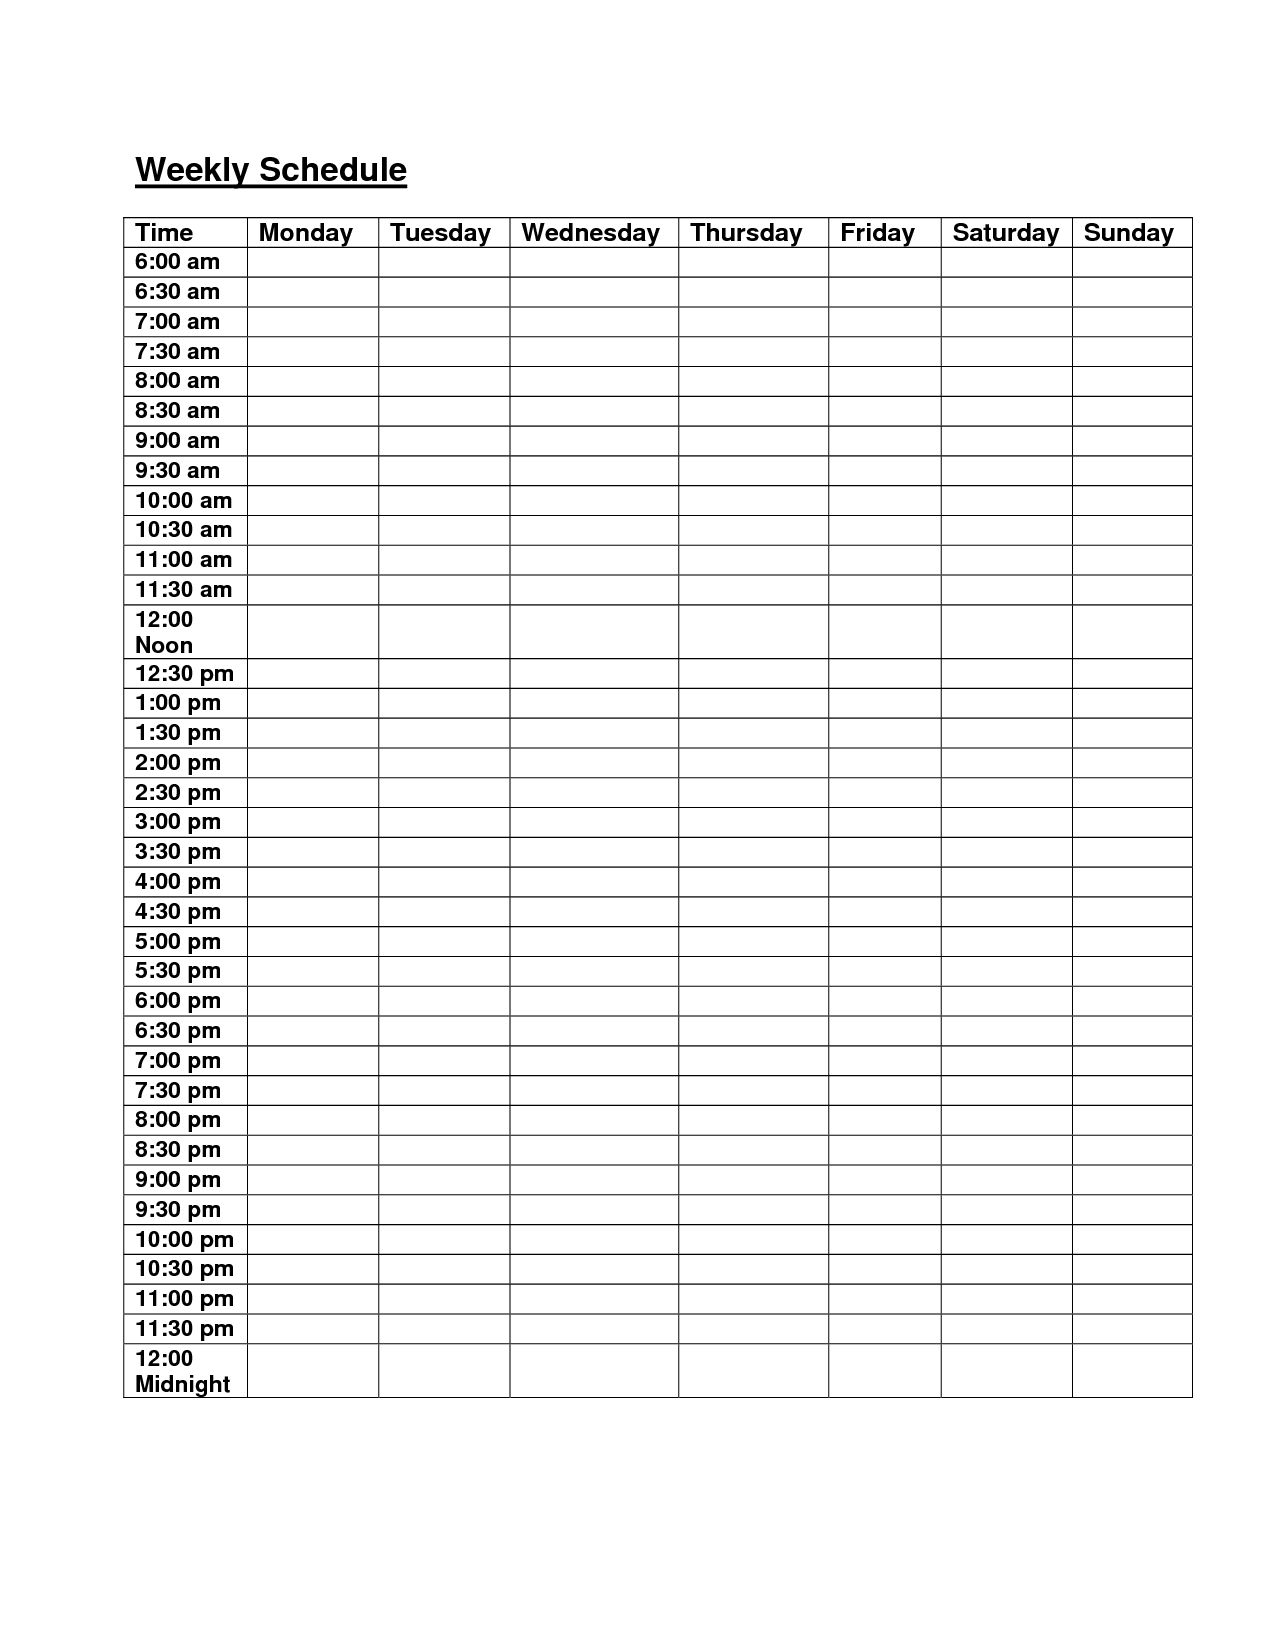 Free Monday Through Friday Planner Template | Get Your with regard to Free Monday Through Friday Calendar